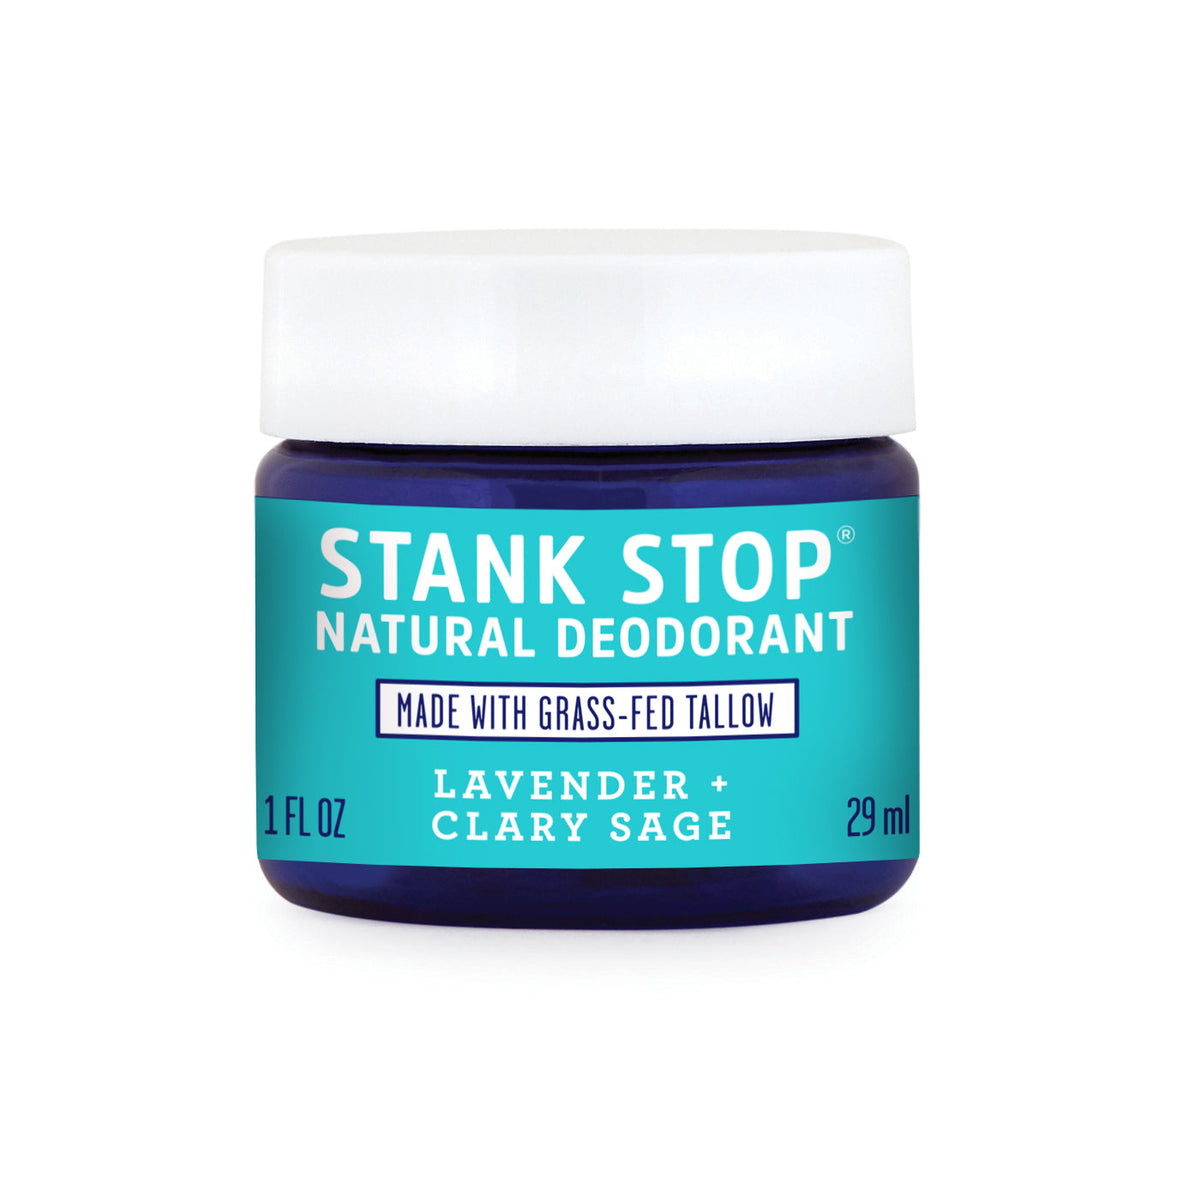 Stank Stop Cream Deodorant, Lavender+Sage, 1 Oz by FATCO Skincare Products